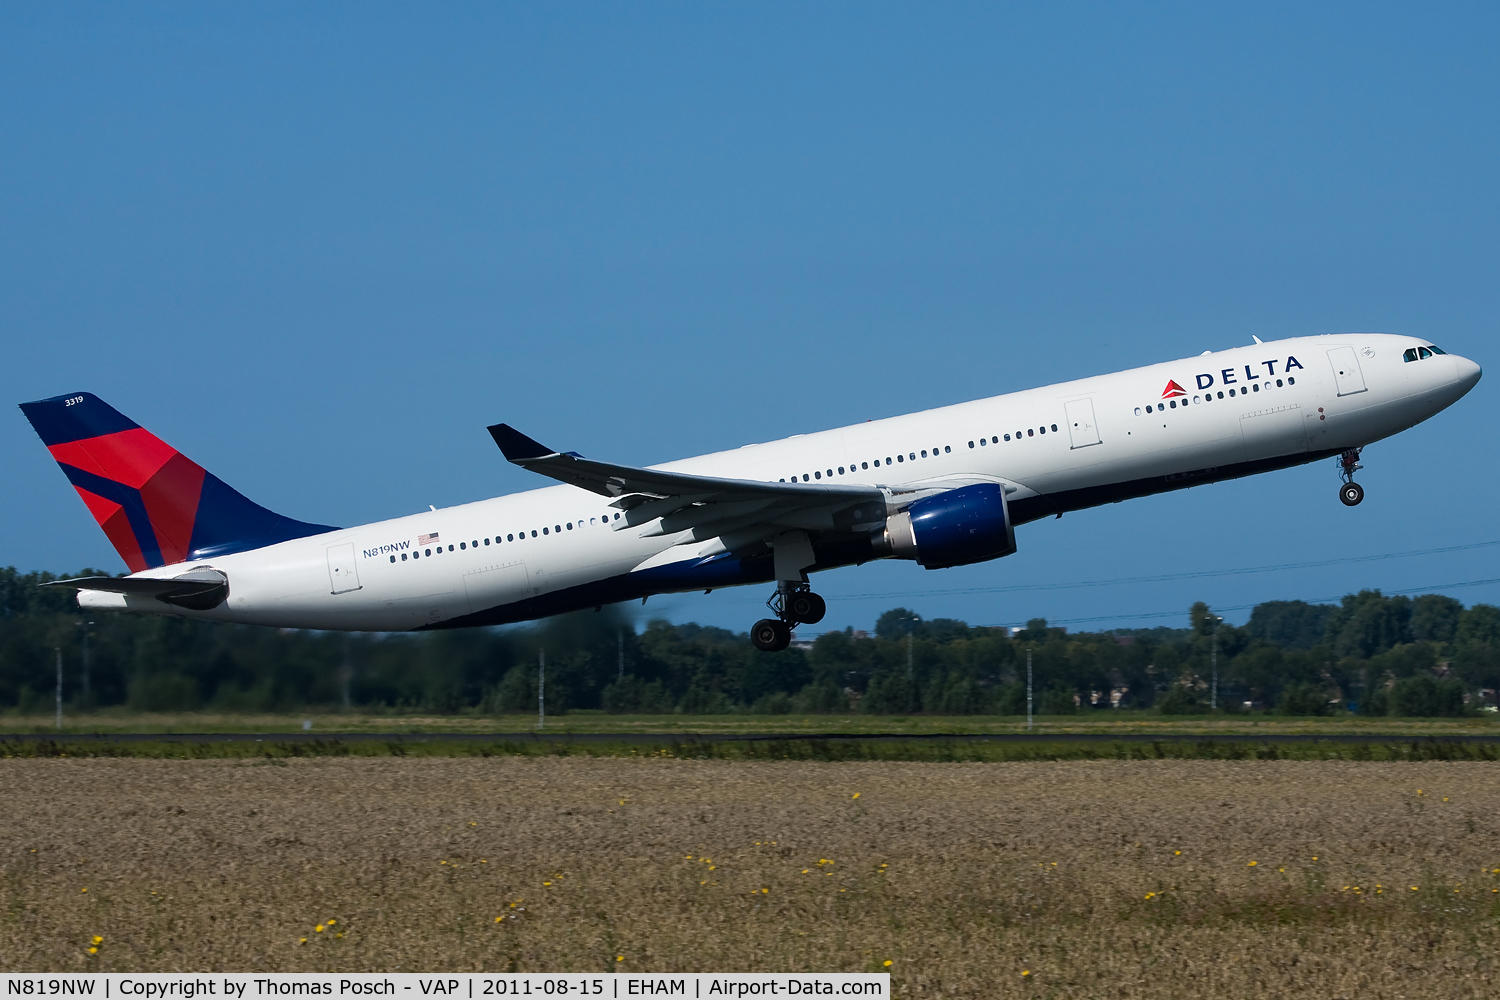 N819NW, 2007 Airbus A330-323 C/N 0858, Delta Airlines